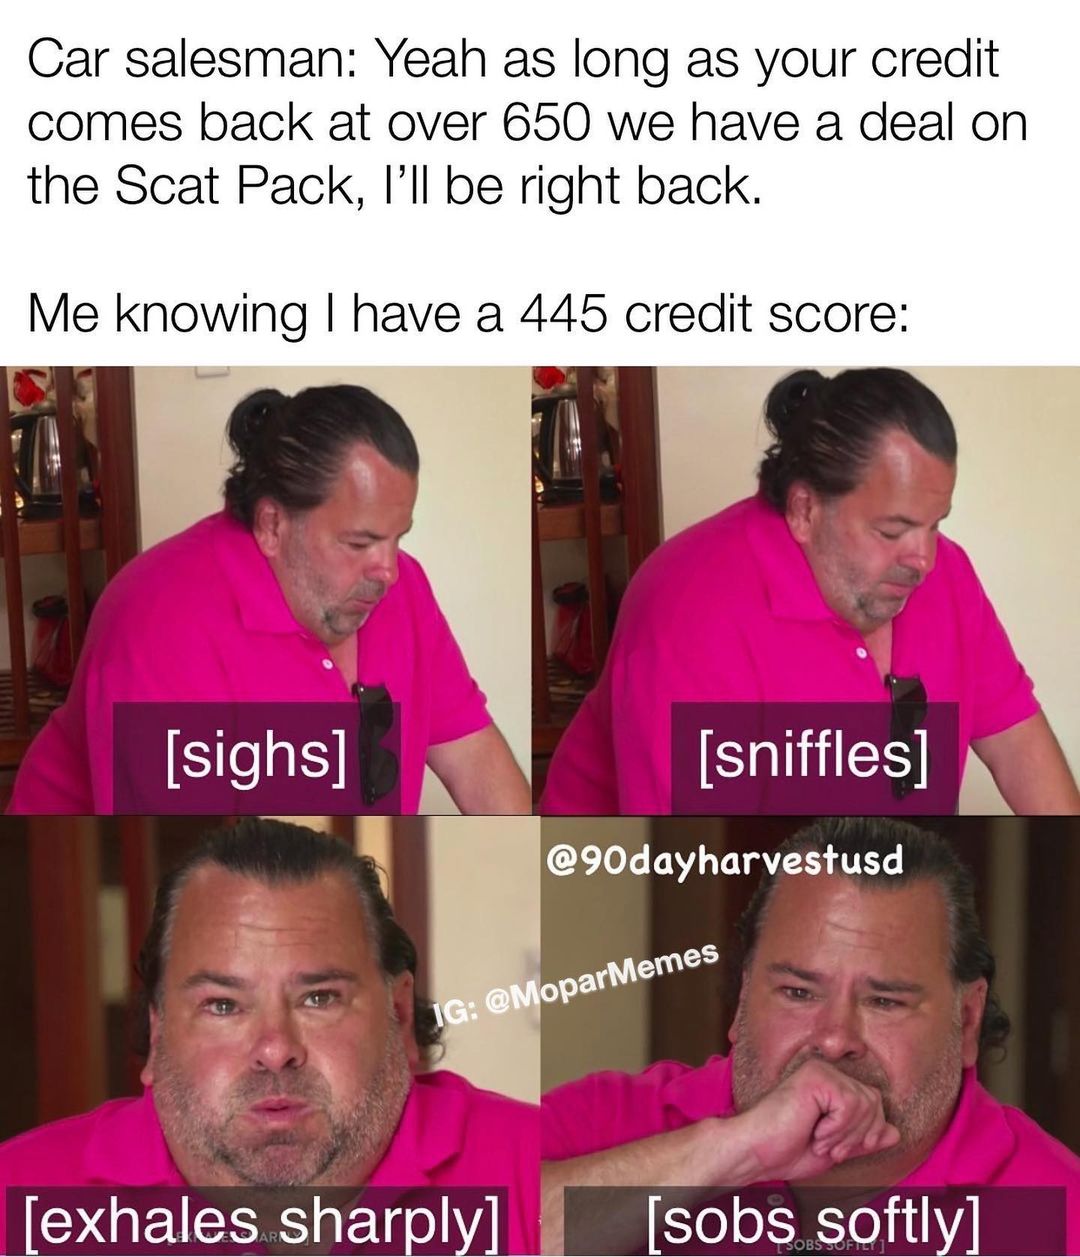 Car salesman: Yeah as long as your credit comes back at over 650 we have a deal on the Scat Pack, I'll be right back.  Me knowing I have a 445 credit score:  [sighs] [sniffles] [exhales sharply] [sobs softly]